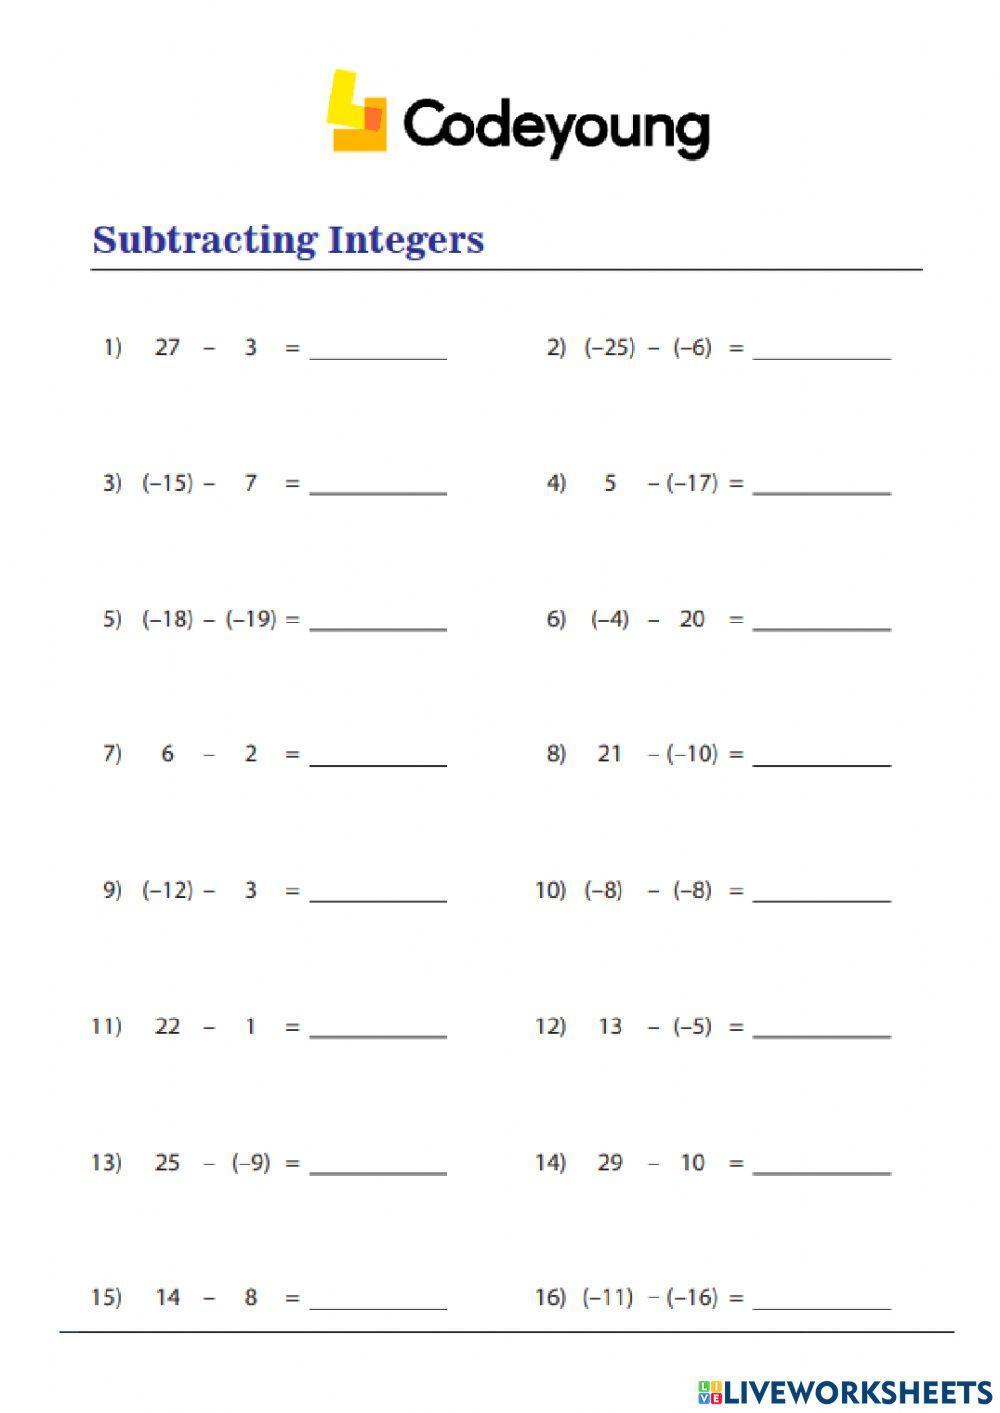 An Introduction to Subtraction of Integers Concept HW